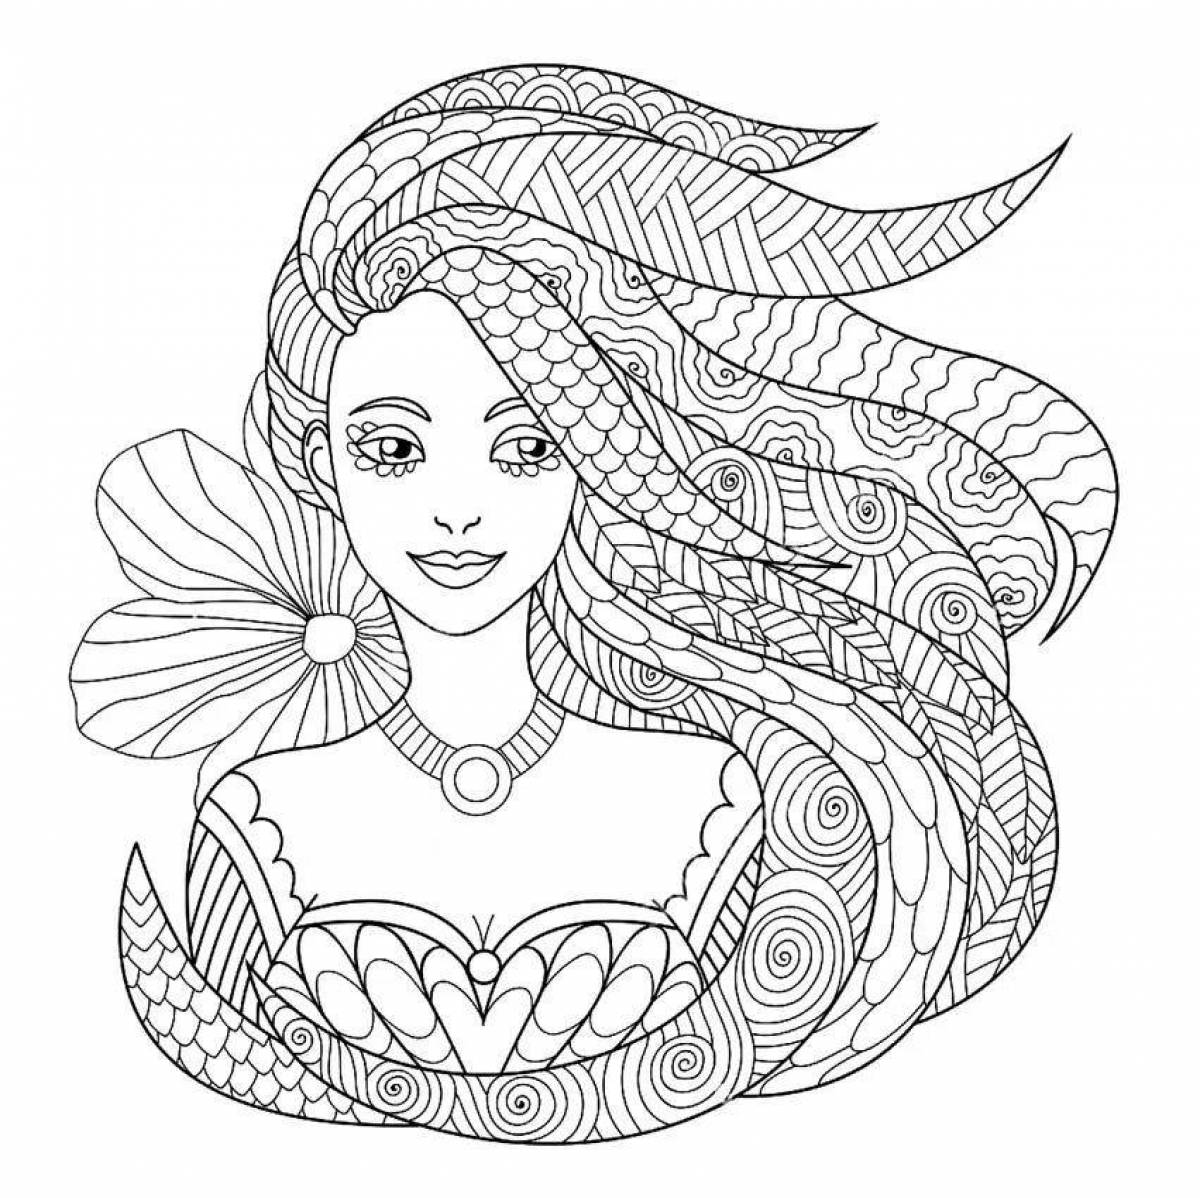 Charming seal coloring page